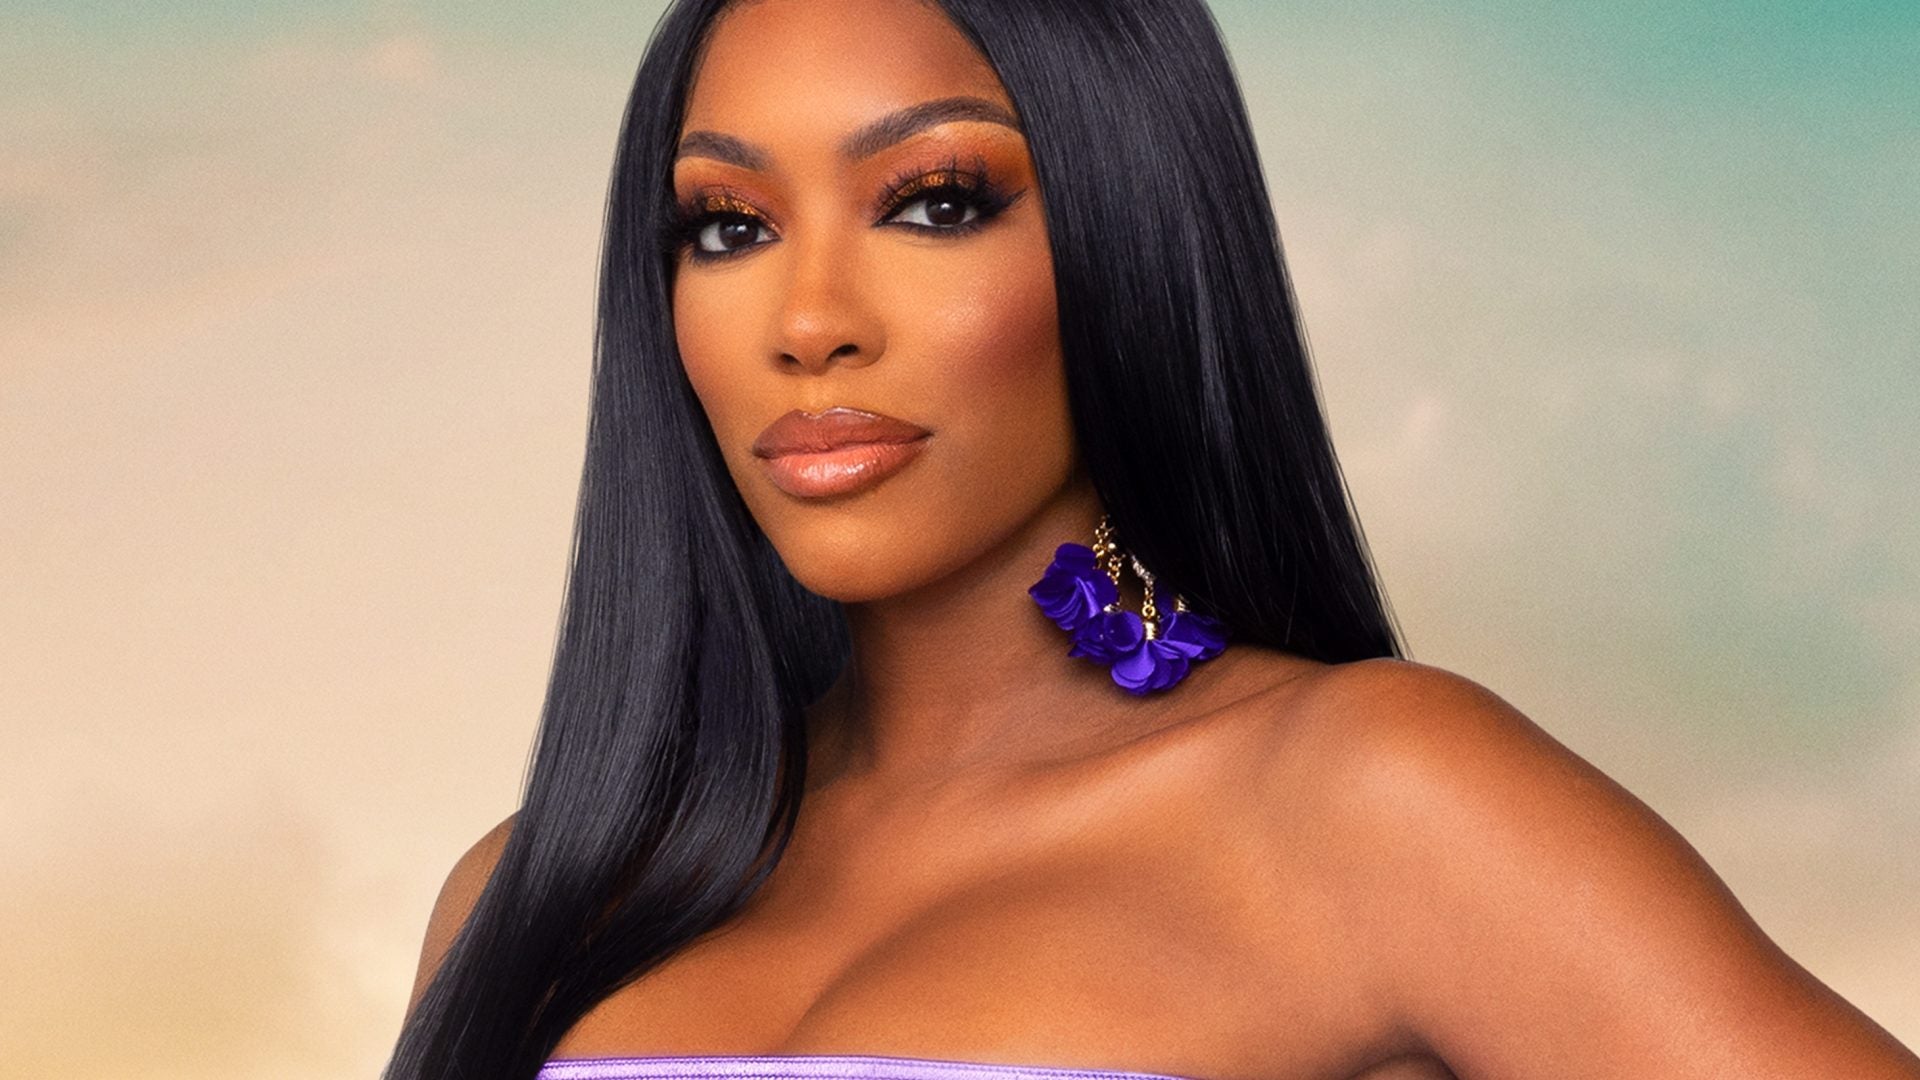 Porsha Williams Is Back On Reality TV And Dishing On Married Life, Postpartum Depression, And Yes, Those Rumors